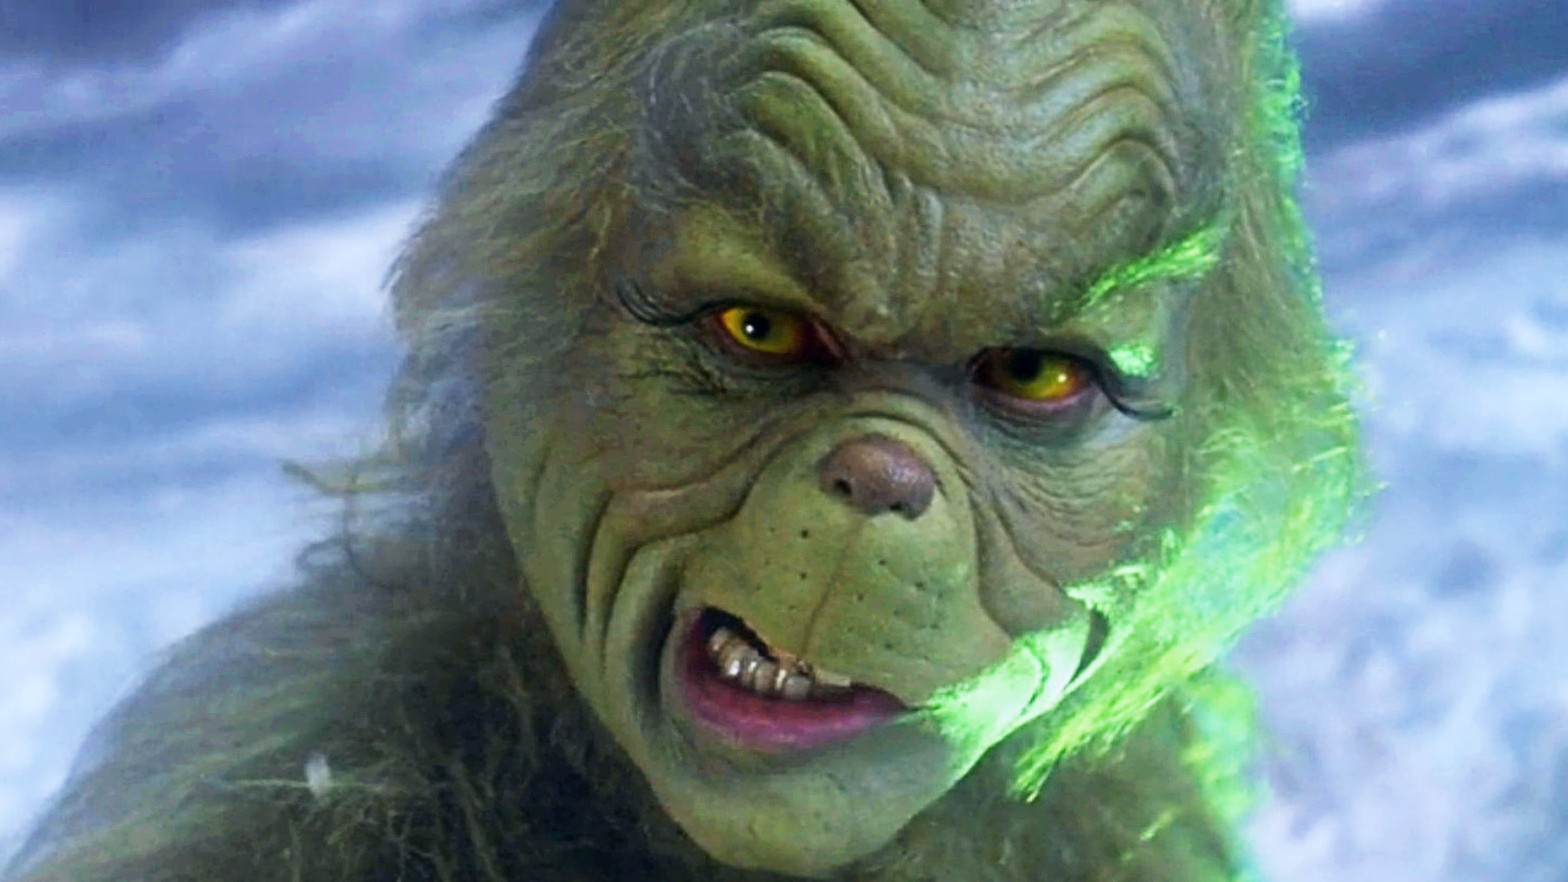 Exclusive: Jim Carrey Returning For The Grinch 2 | GIANT FREAKIN ROBOT